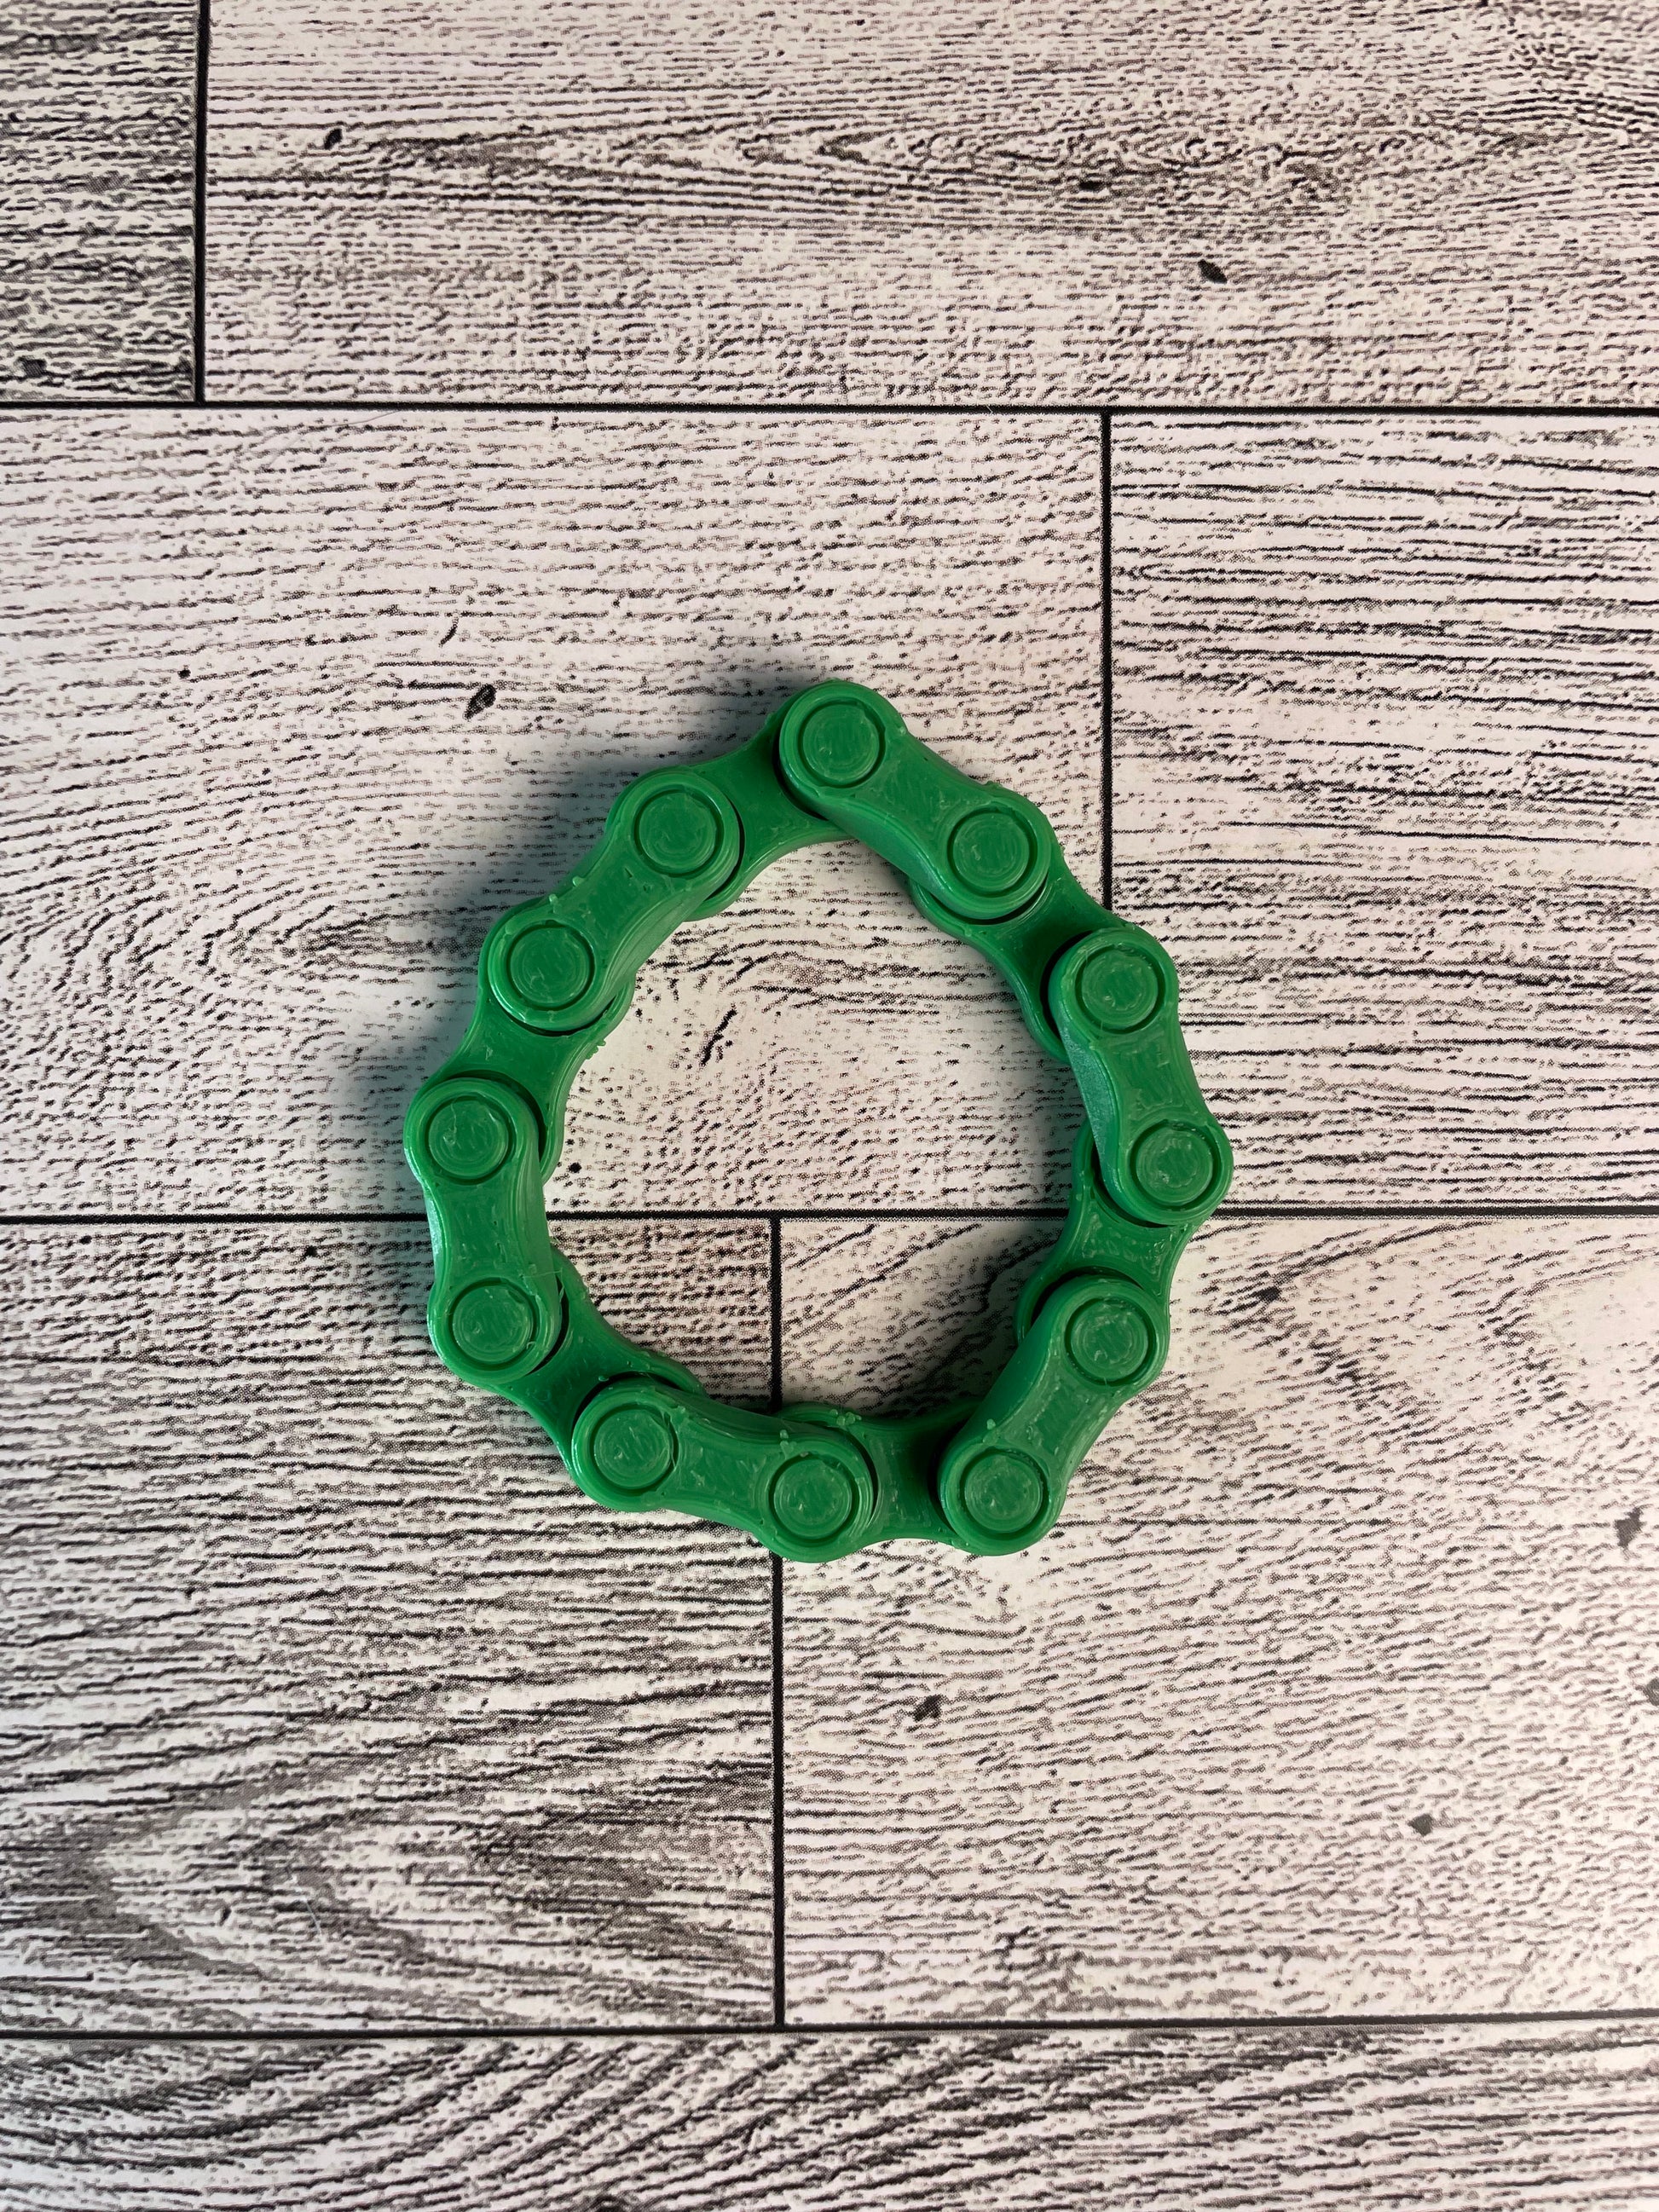 A green chain link on a wood backdrop. The chain is arranged in a circle shape and there are six links.